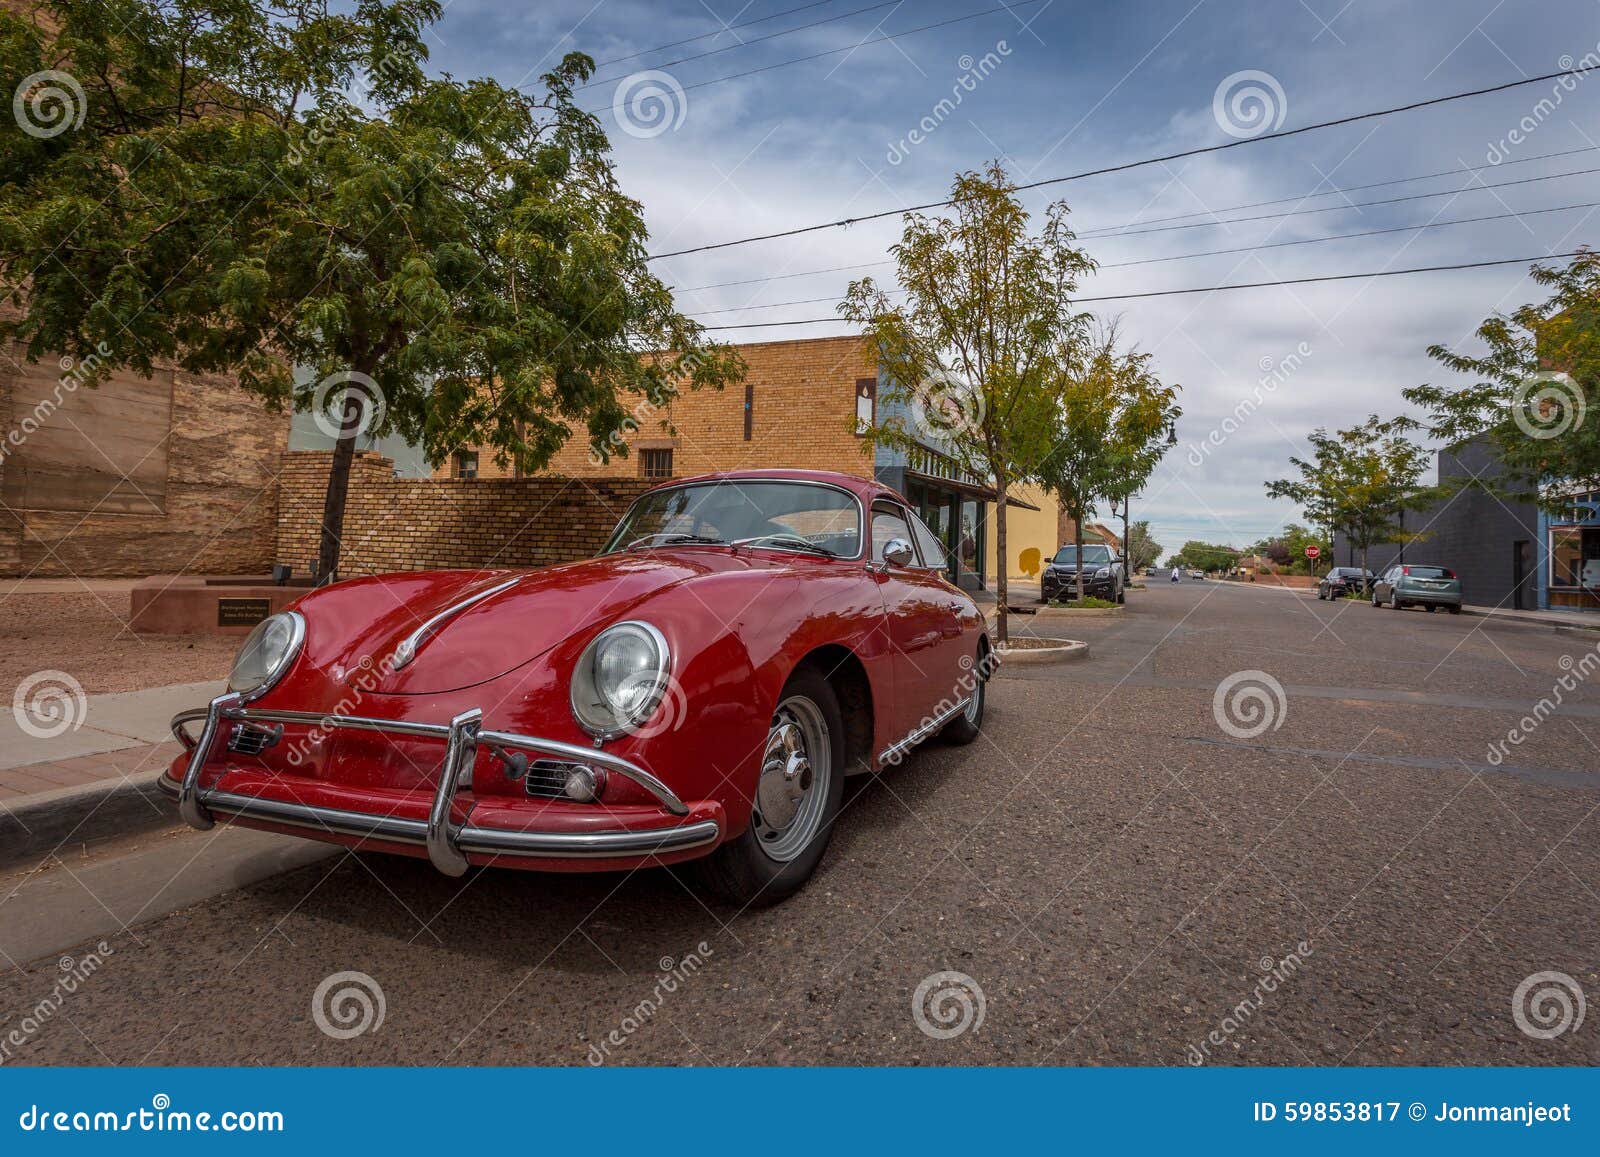 Old Classic Cars And Trucks Stock Photo  Image: 59853817